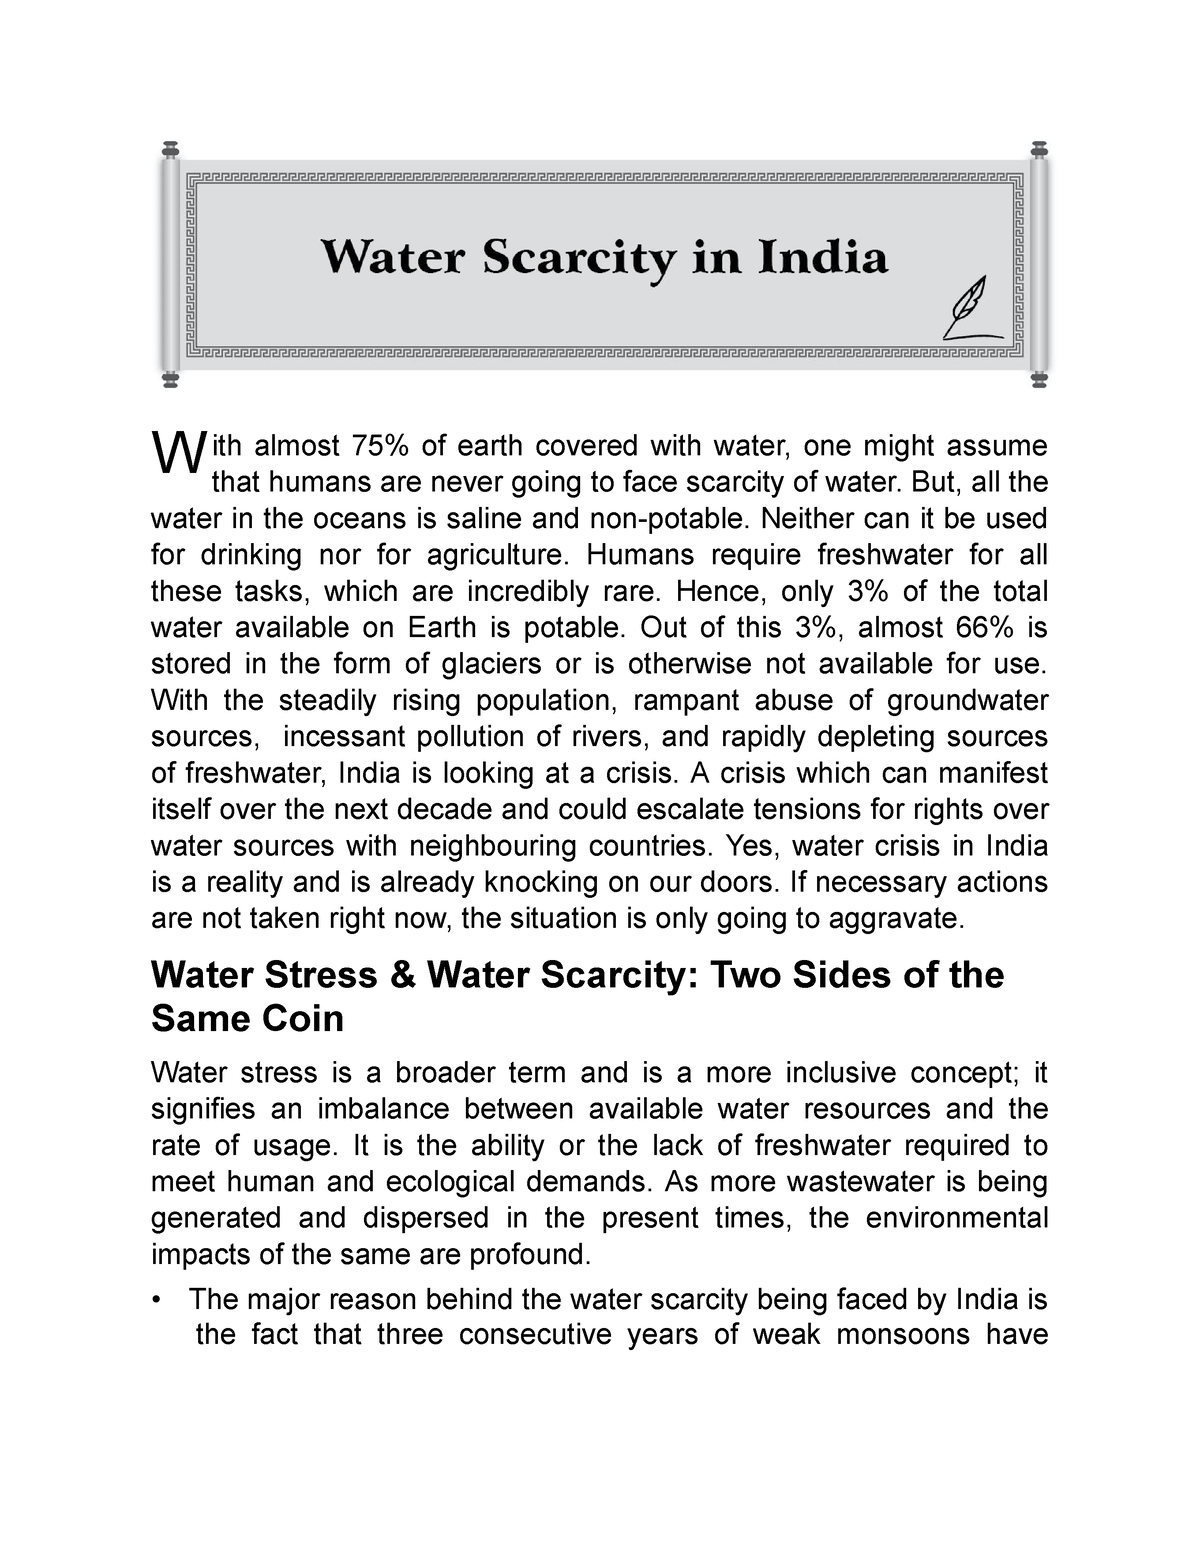 essay on water scarcity in india